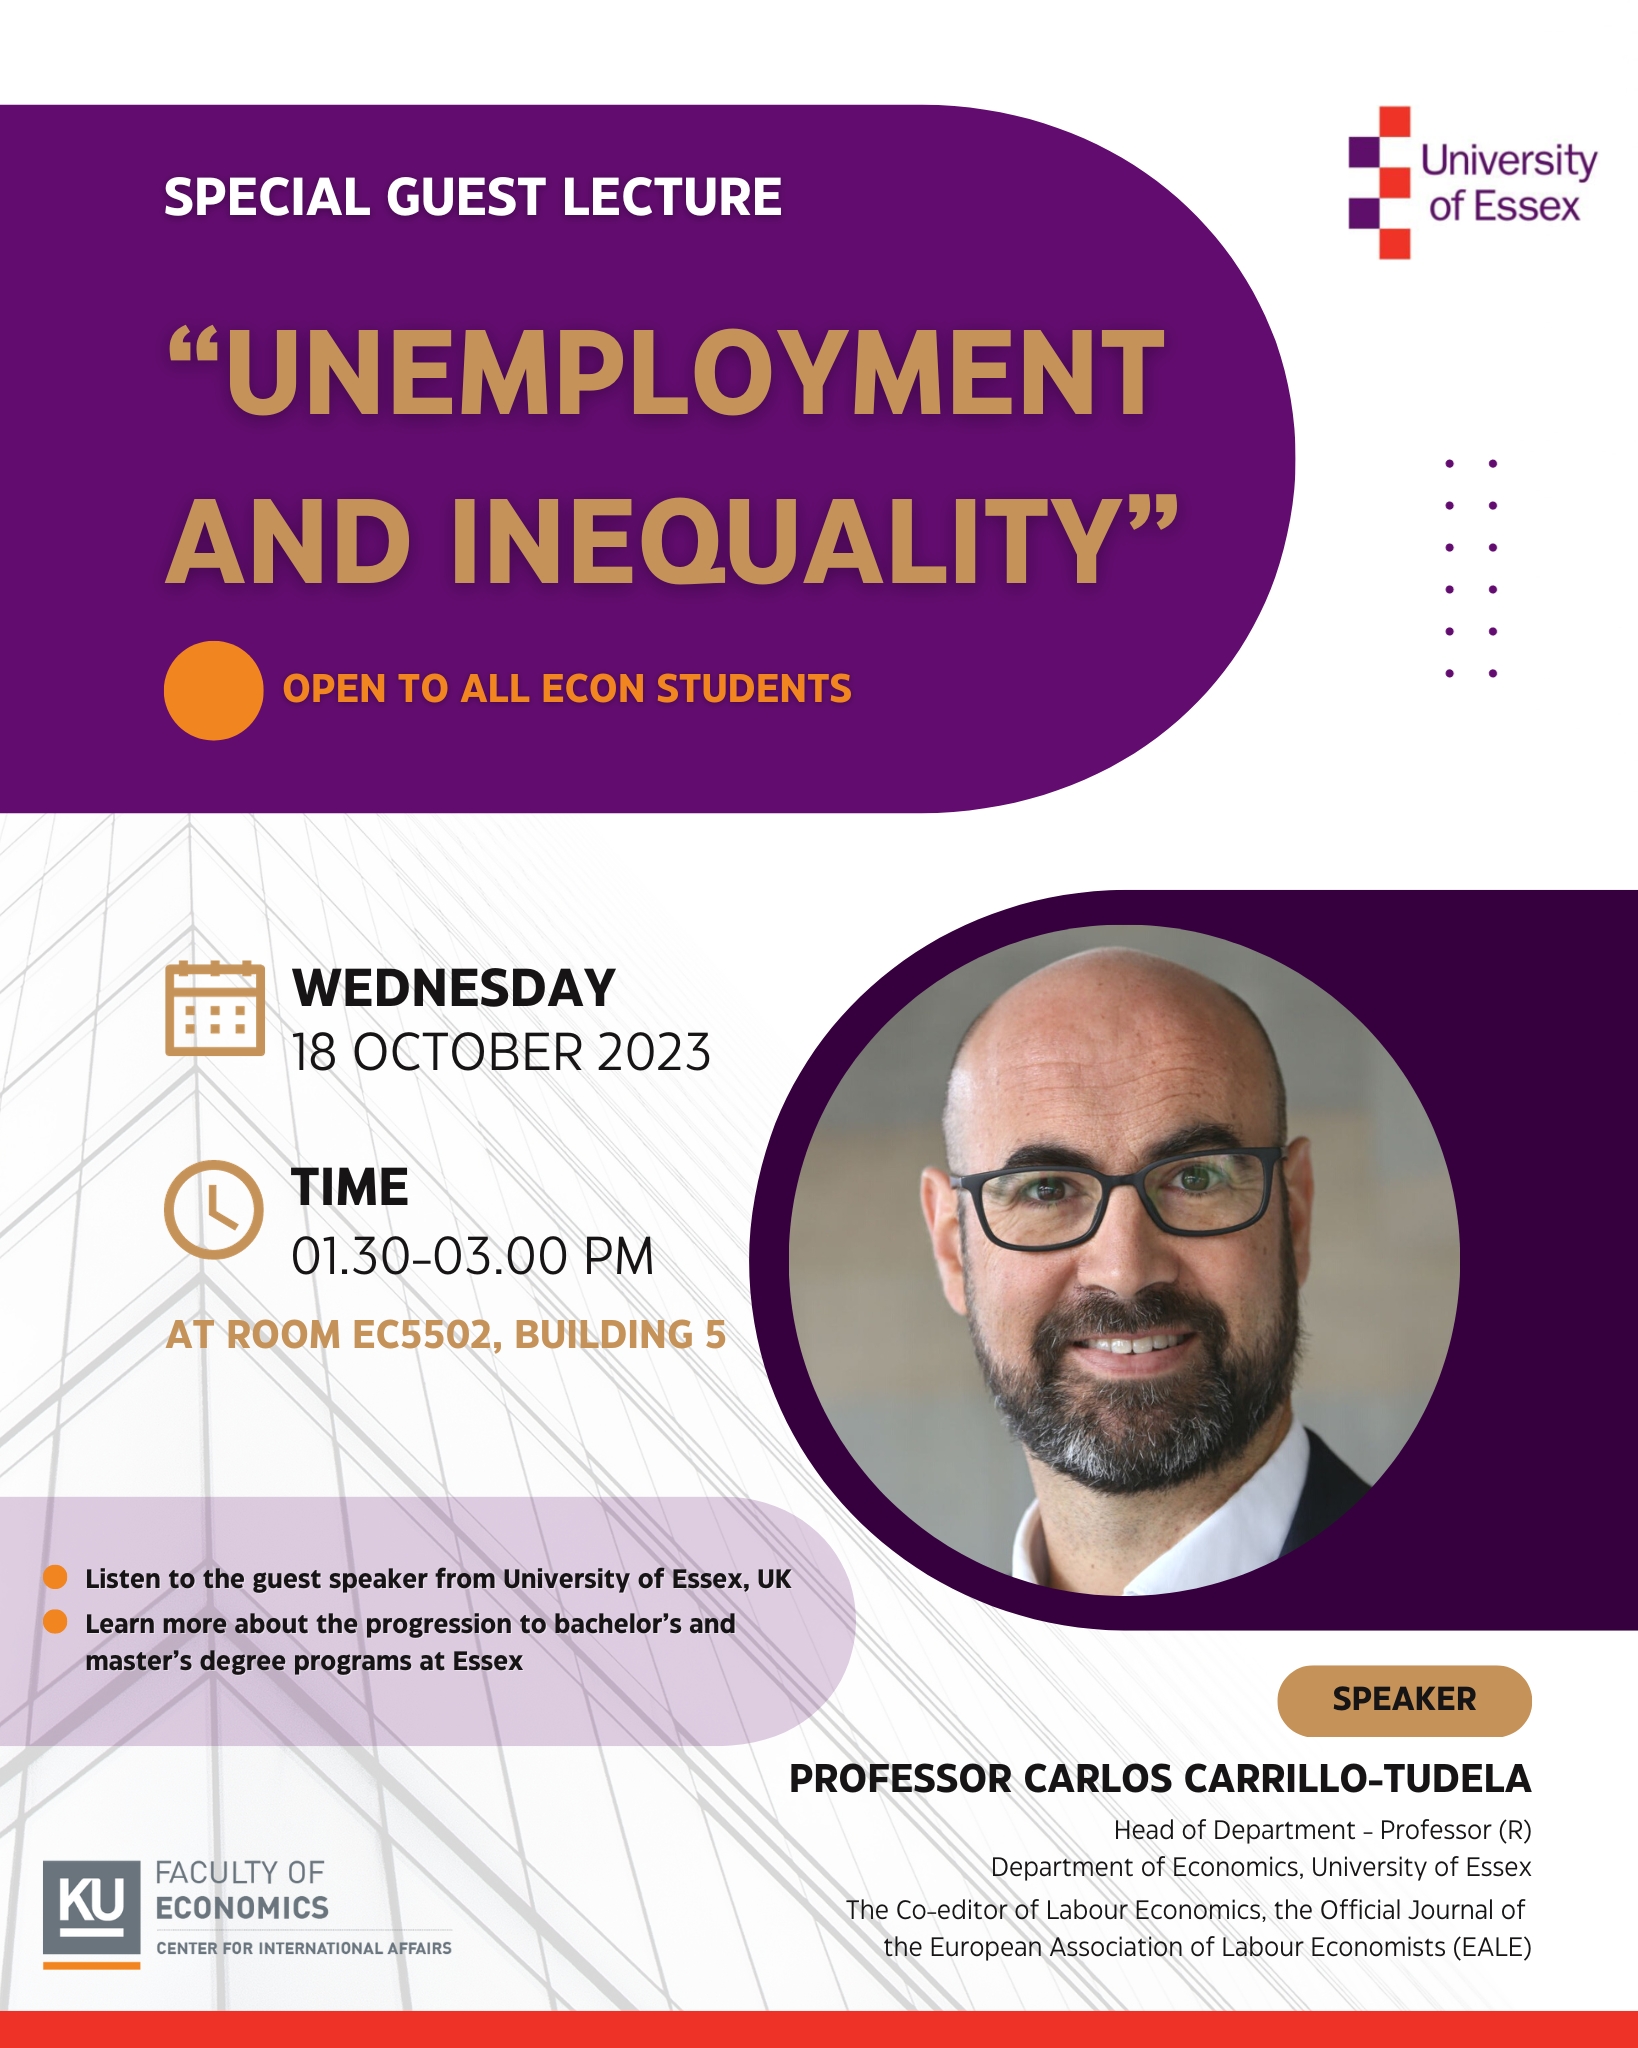 Special Guest Lecture “Unemployment and Inequality”